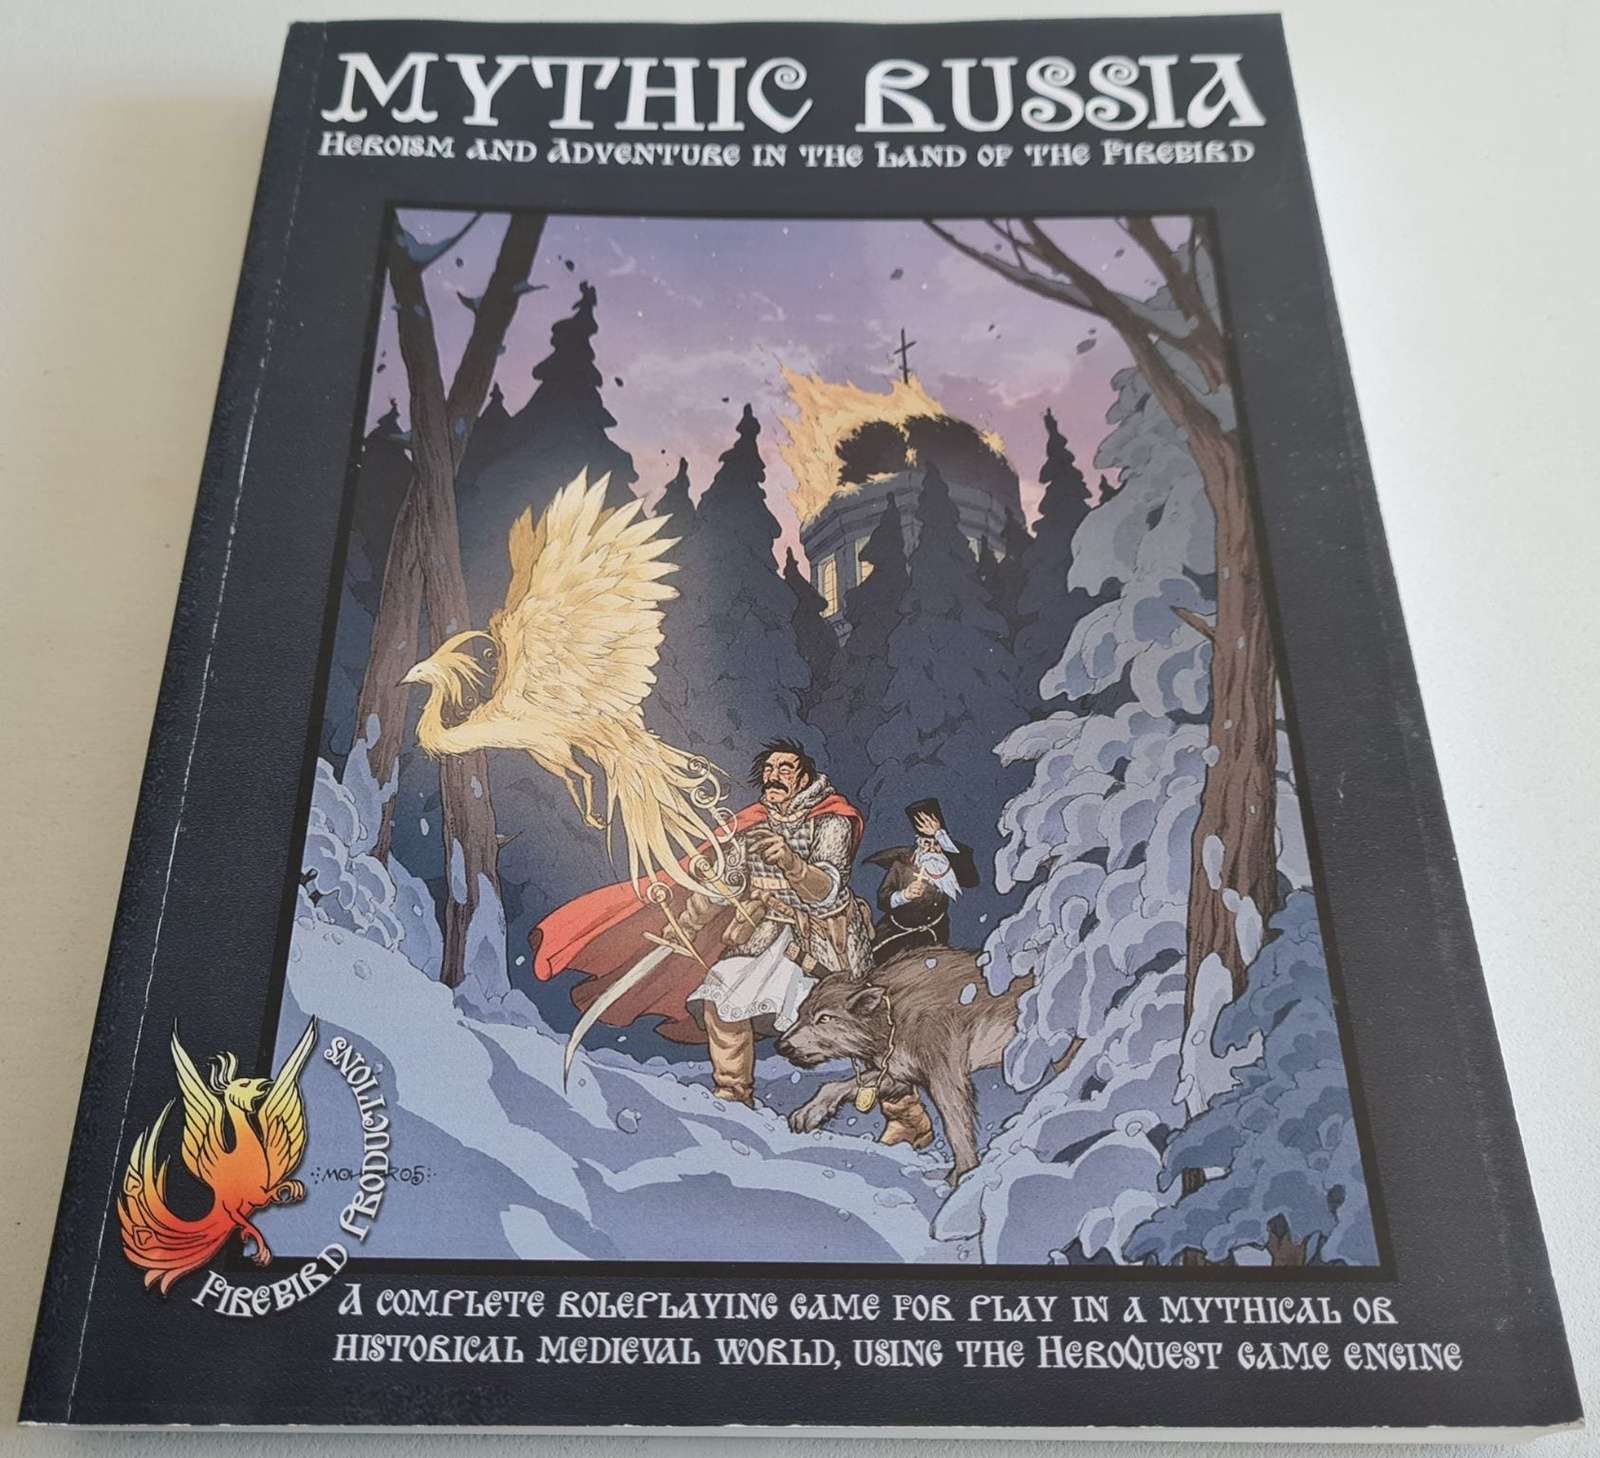 Mythic Russia: Heroism and Adventure in the Land of the Firebird